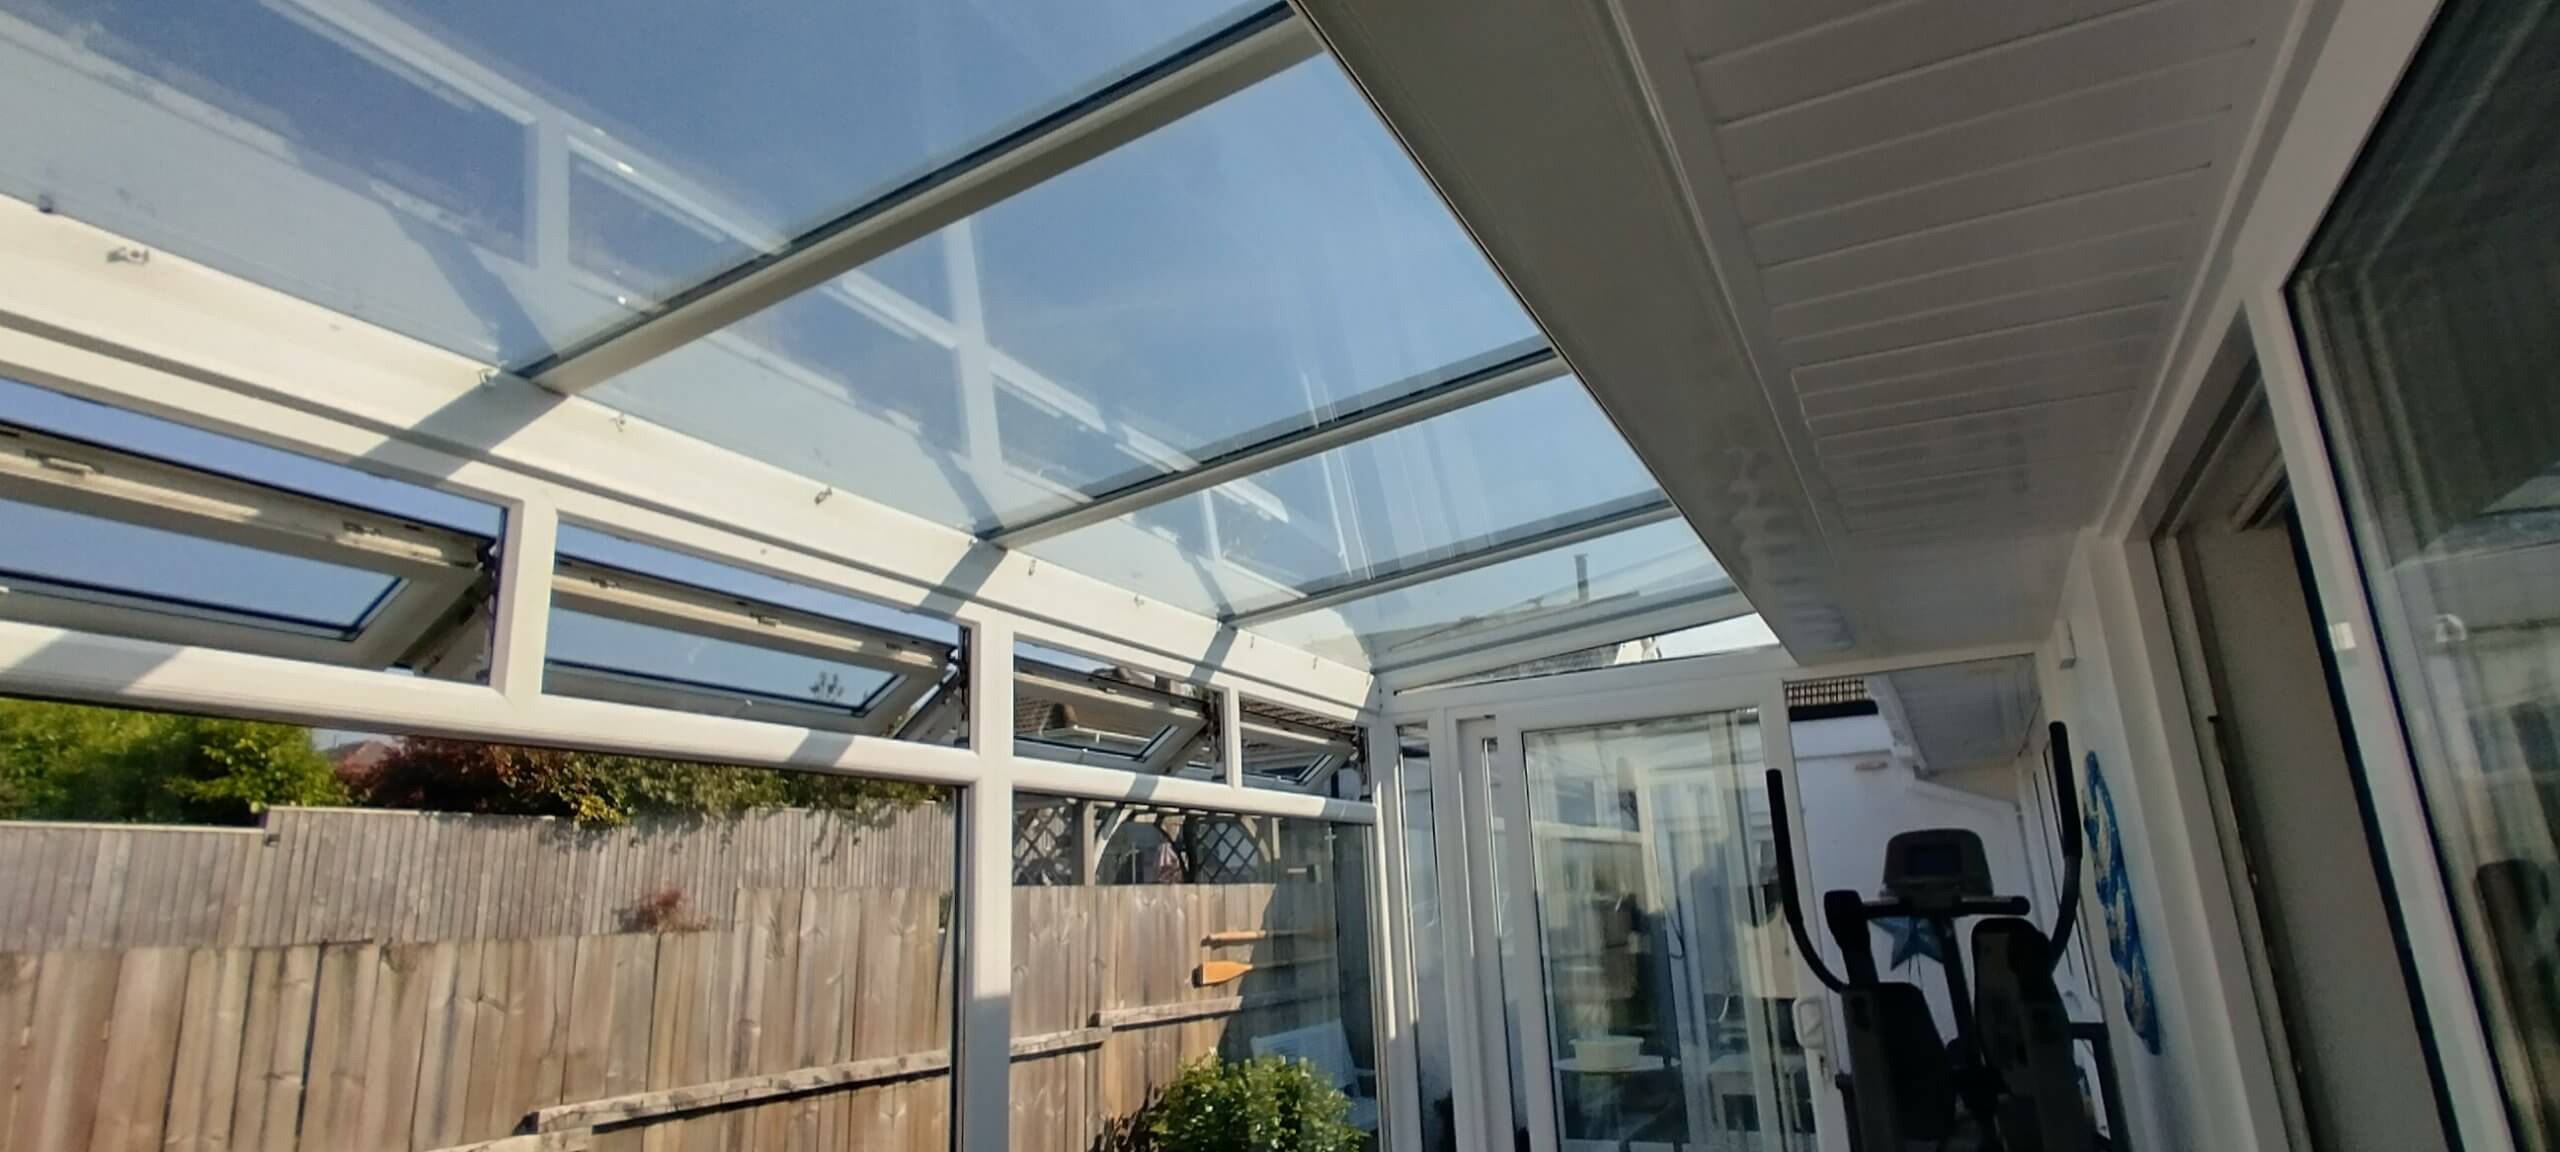 Wembury Plymouth Devon. Lean-to conservatory roof glass fitted with our Dual 15V solar window film. Tinting Express, Devon